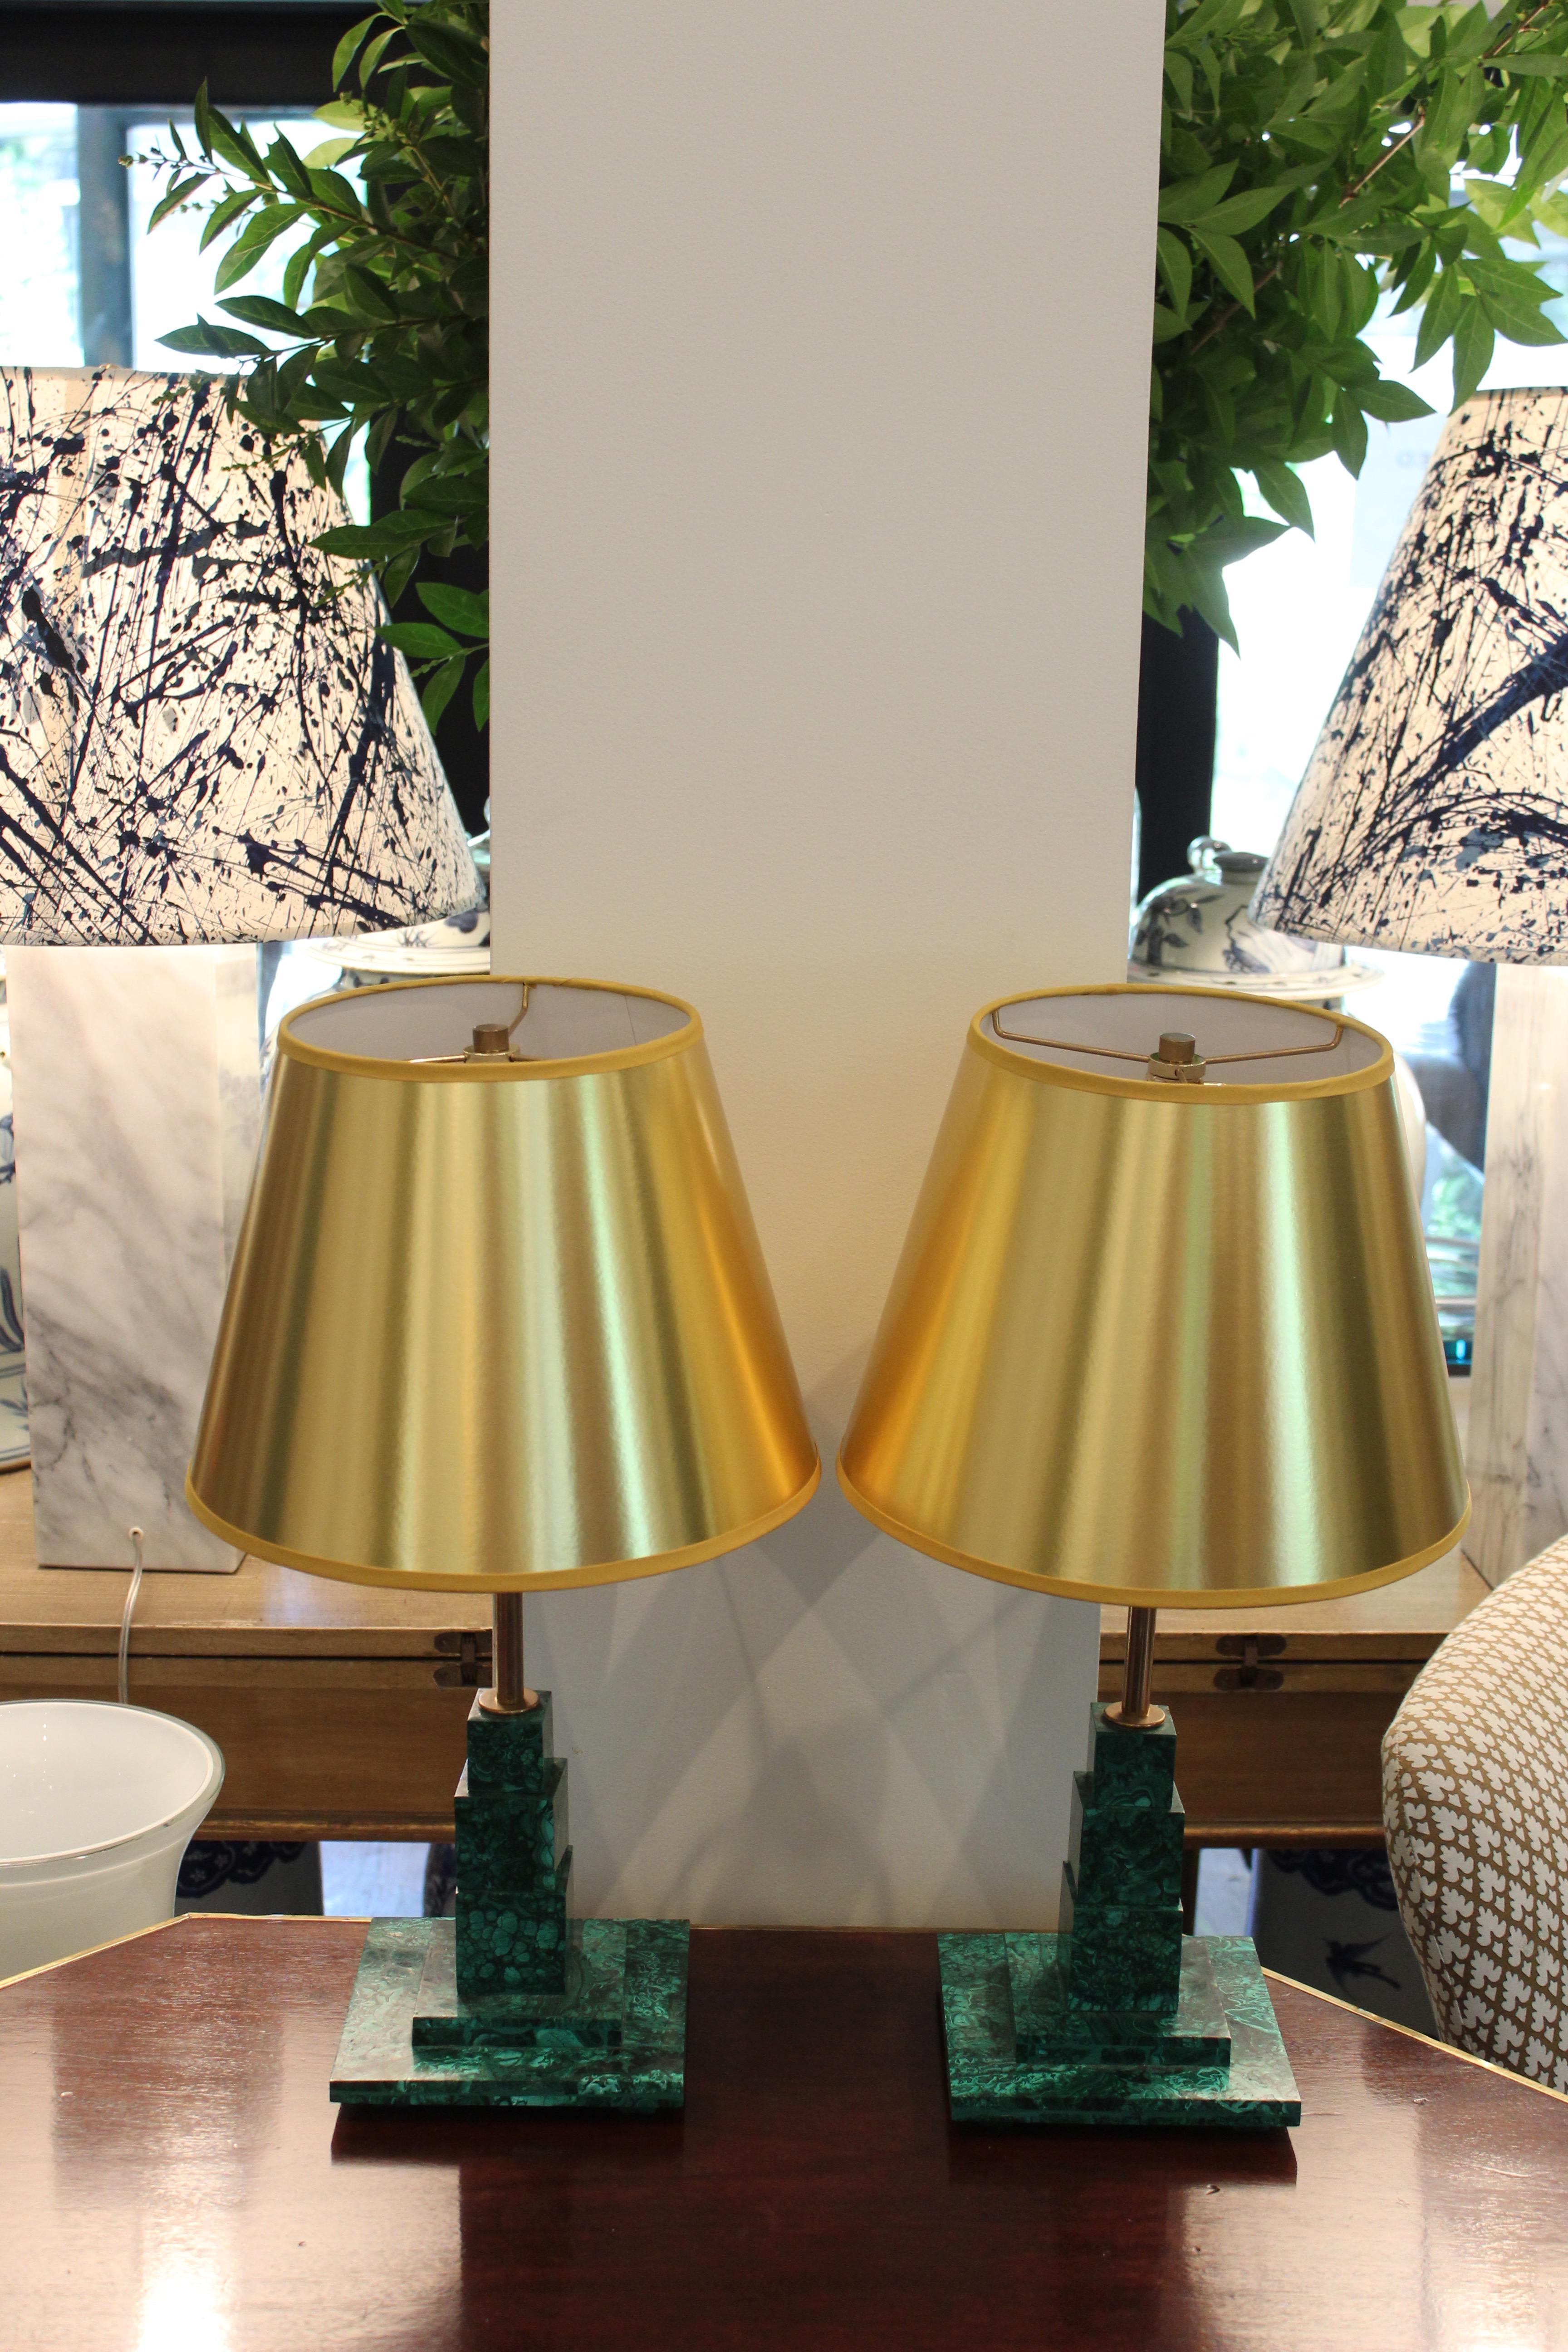 Pair of square malachite table lamps with custom gold shades

Base measures: 6